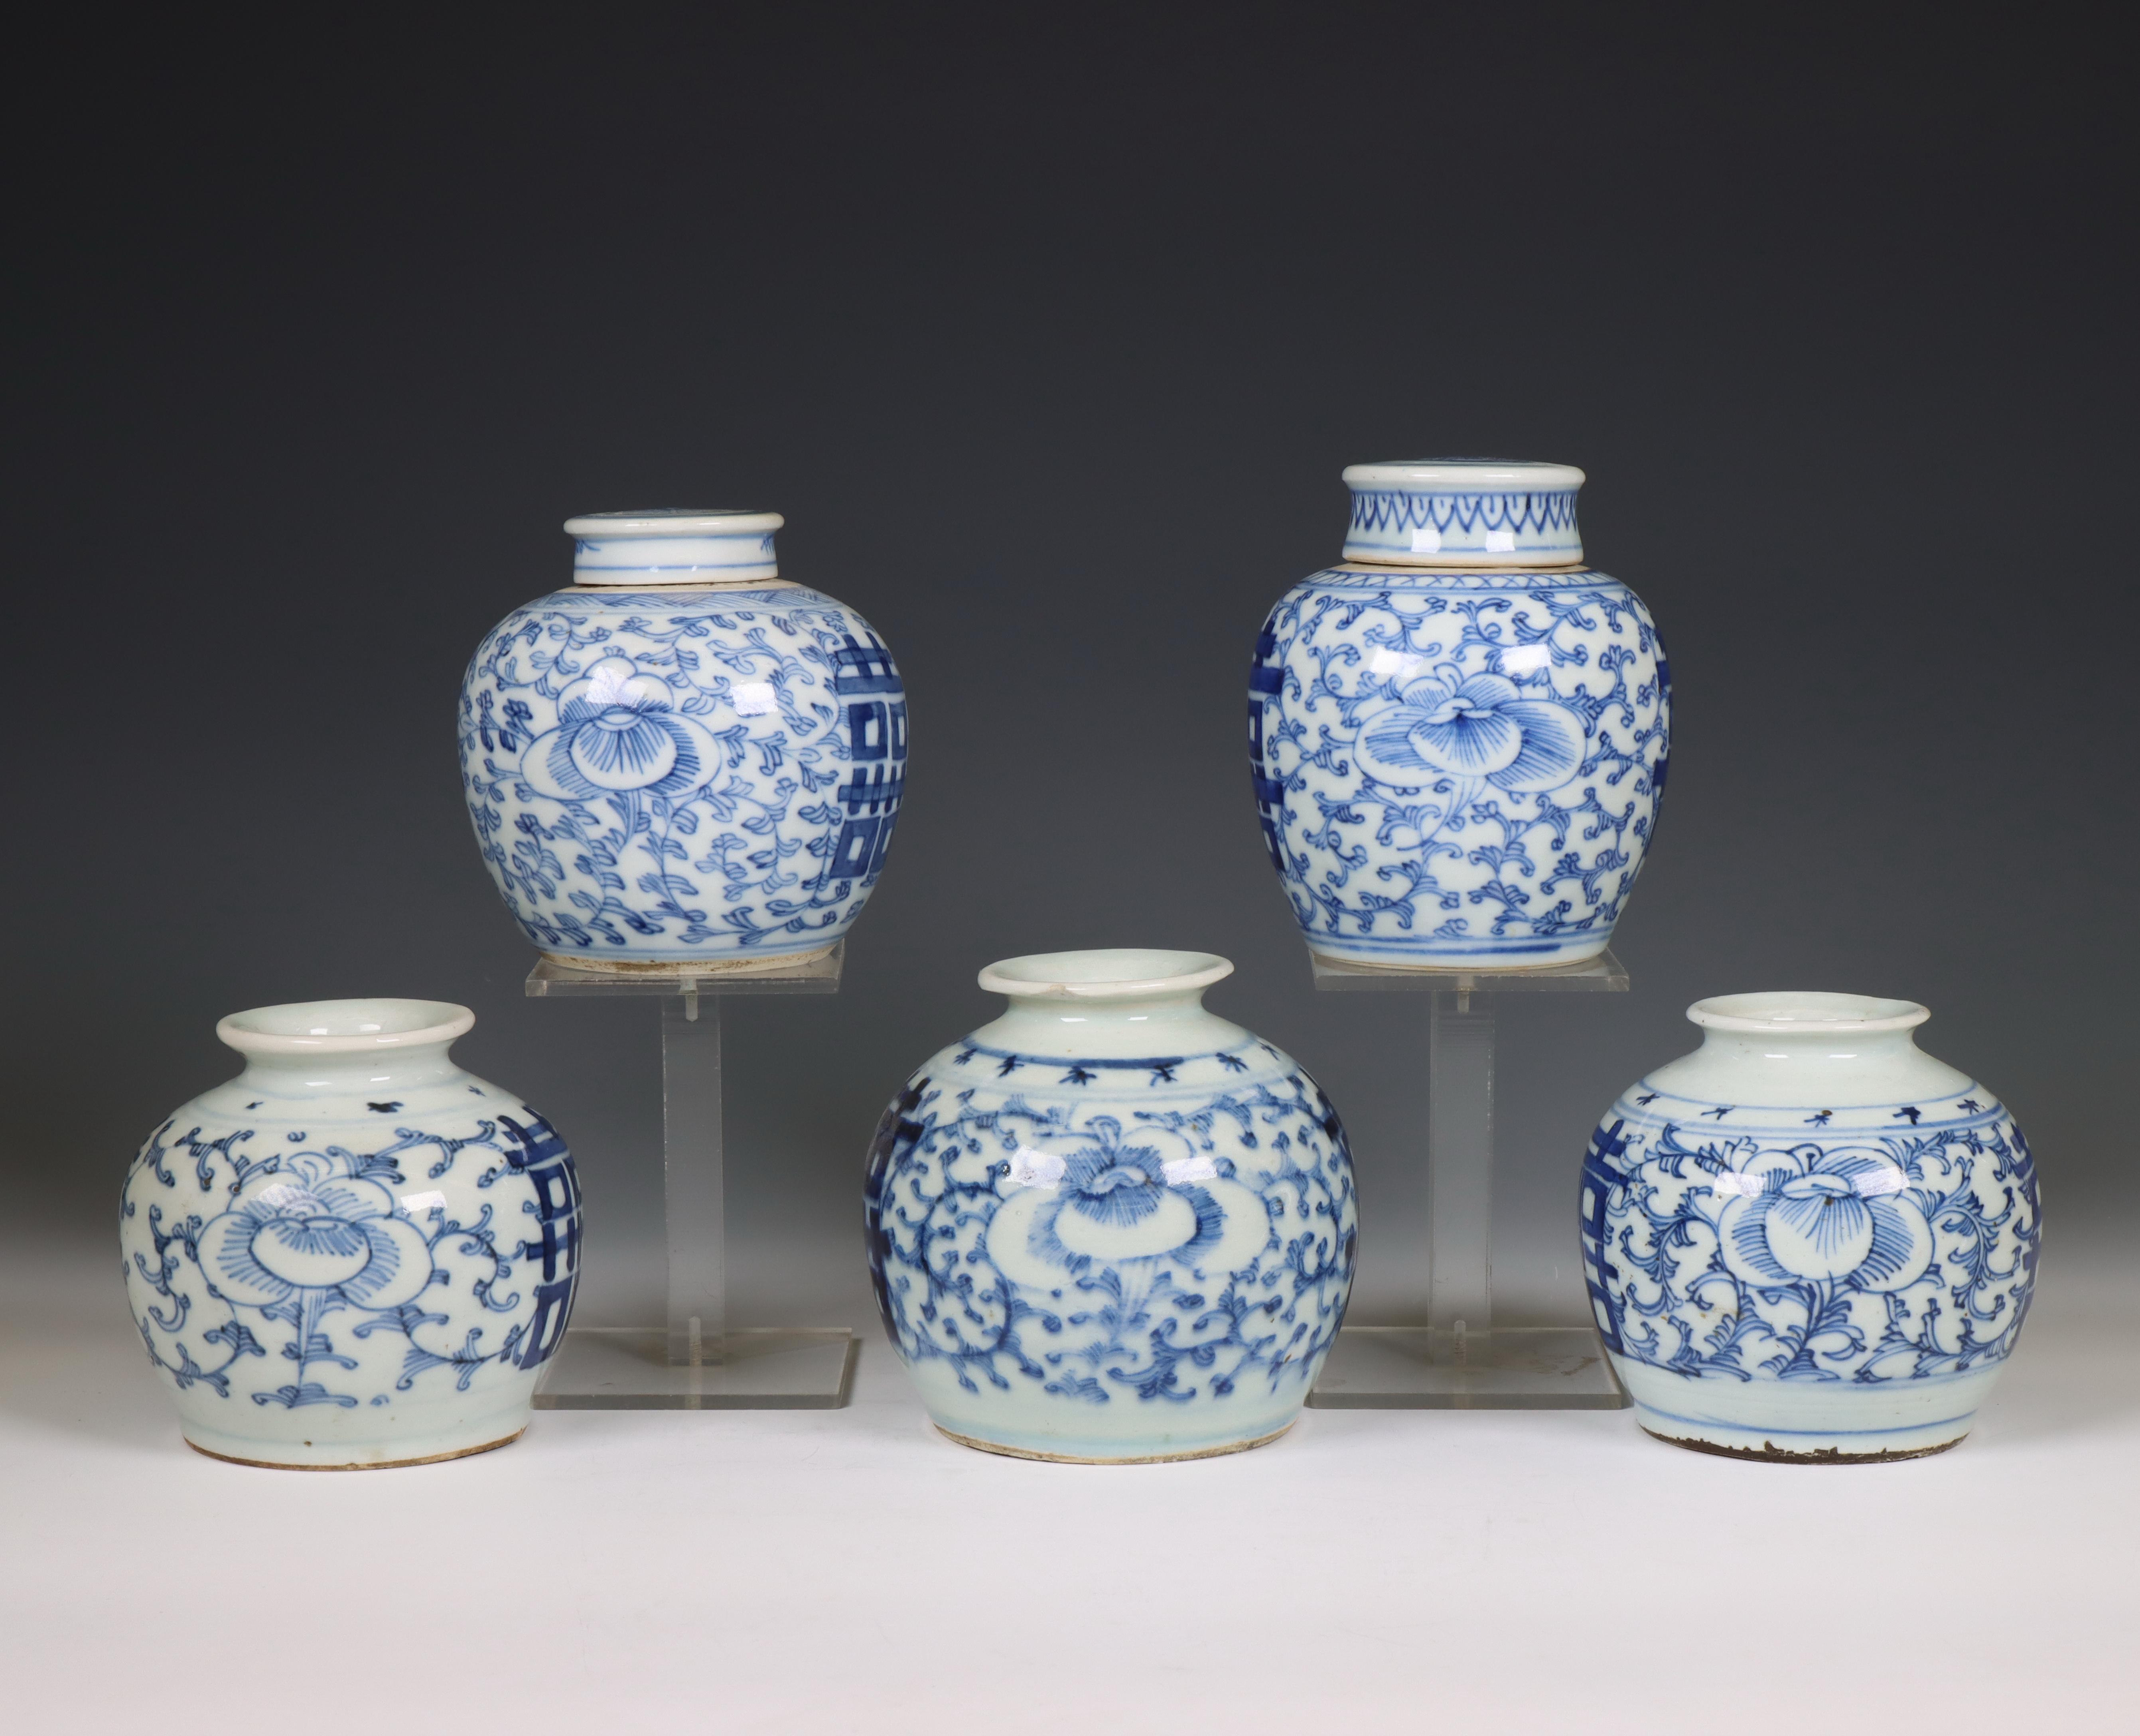 China, five blue and white porcelain jars, 20th century, - Image 2 of 2